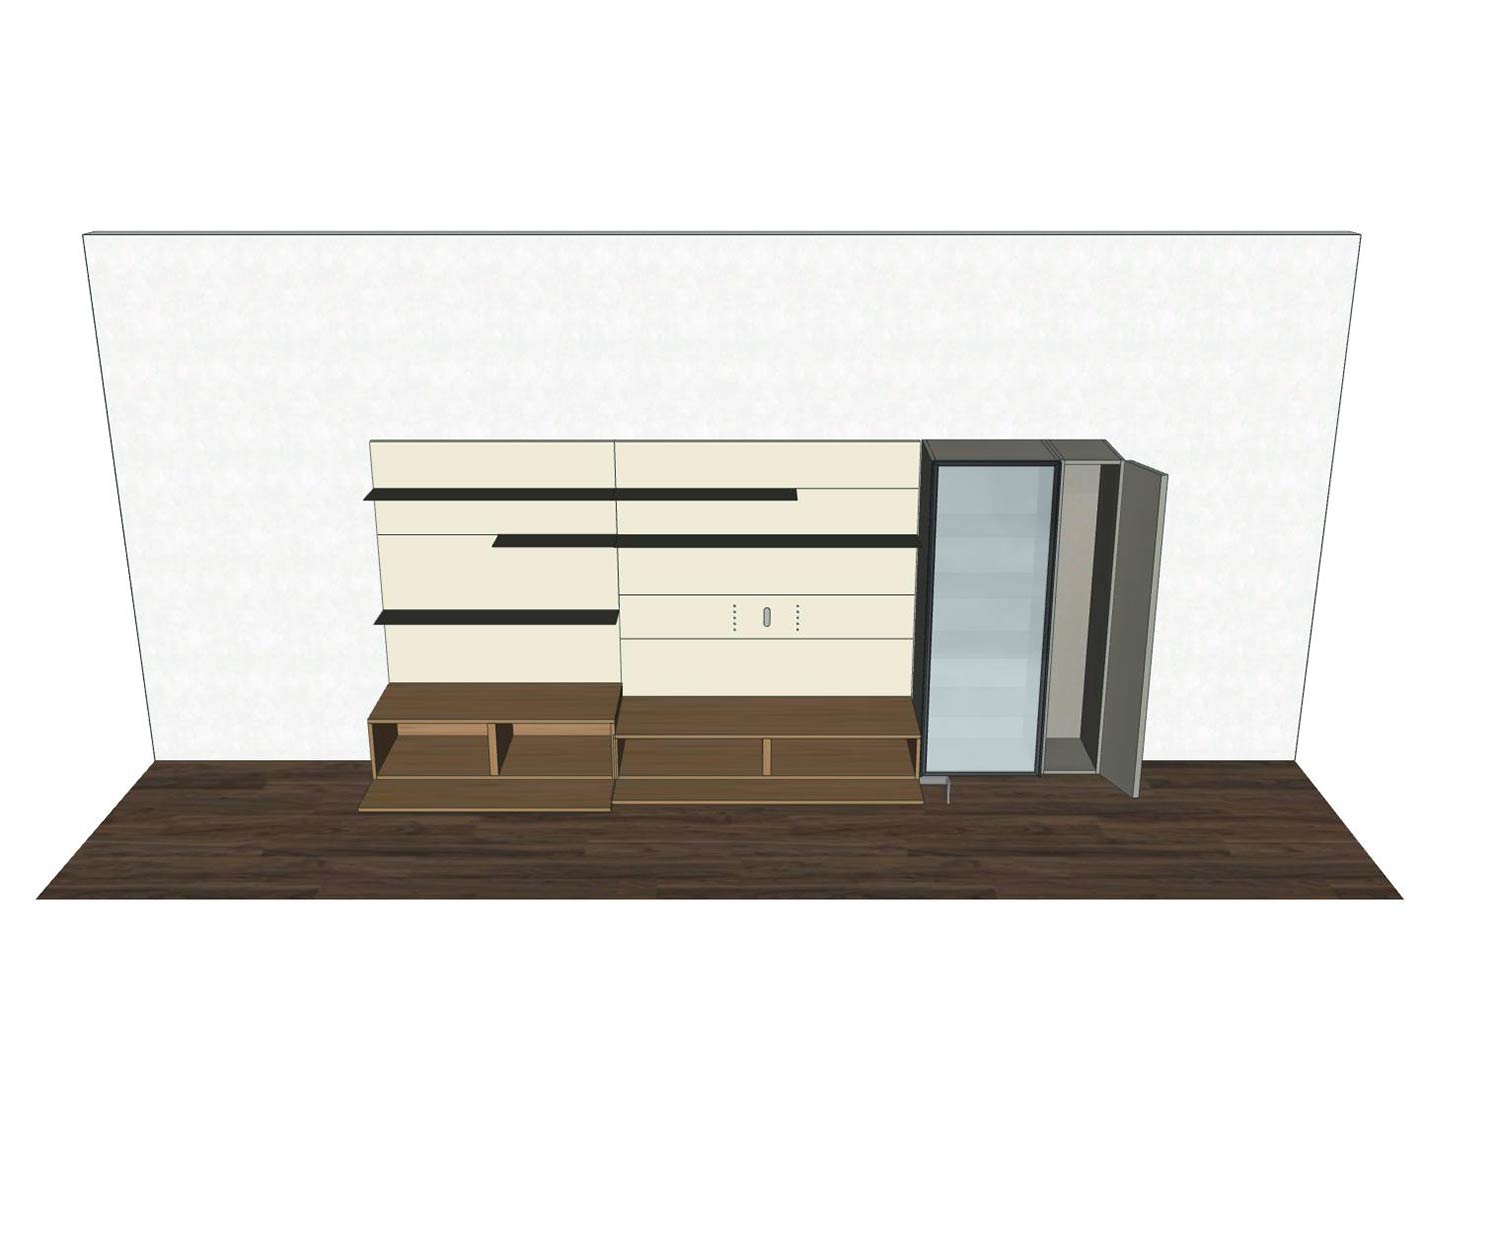 Livitalia Design wall unit C42 individual components marked in colour as sketch